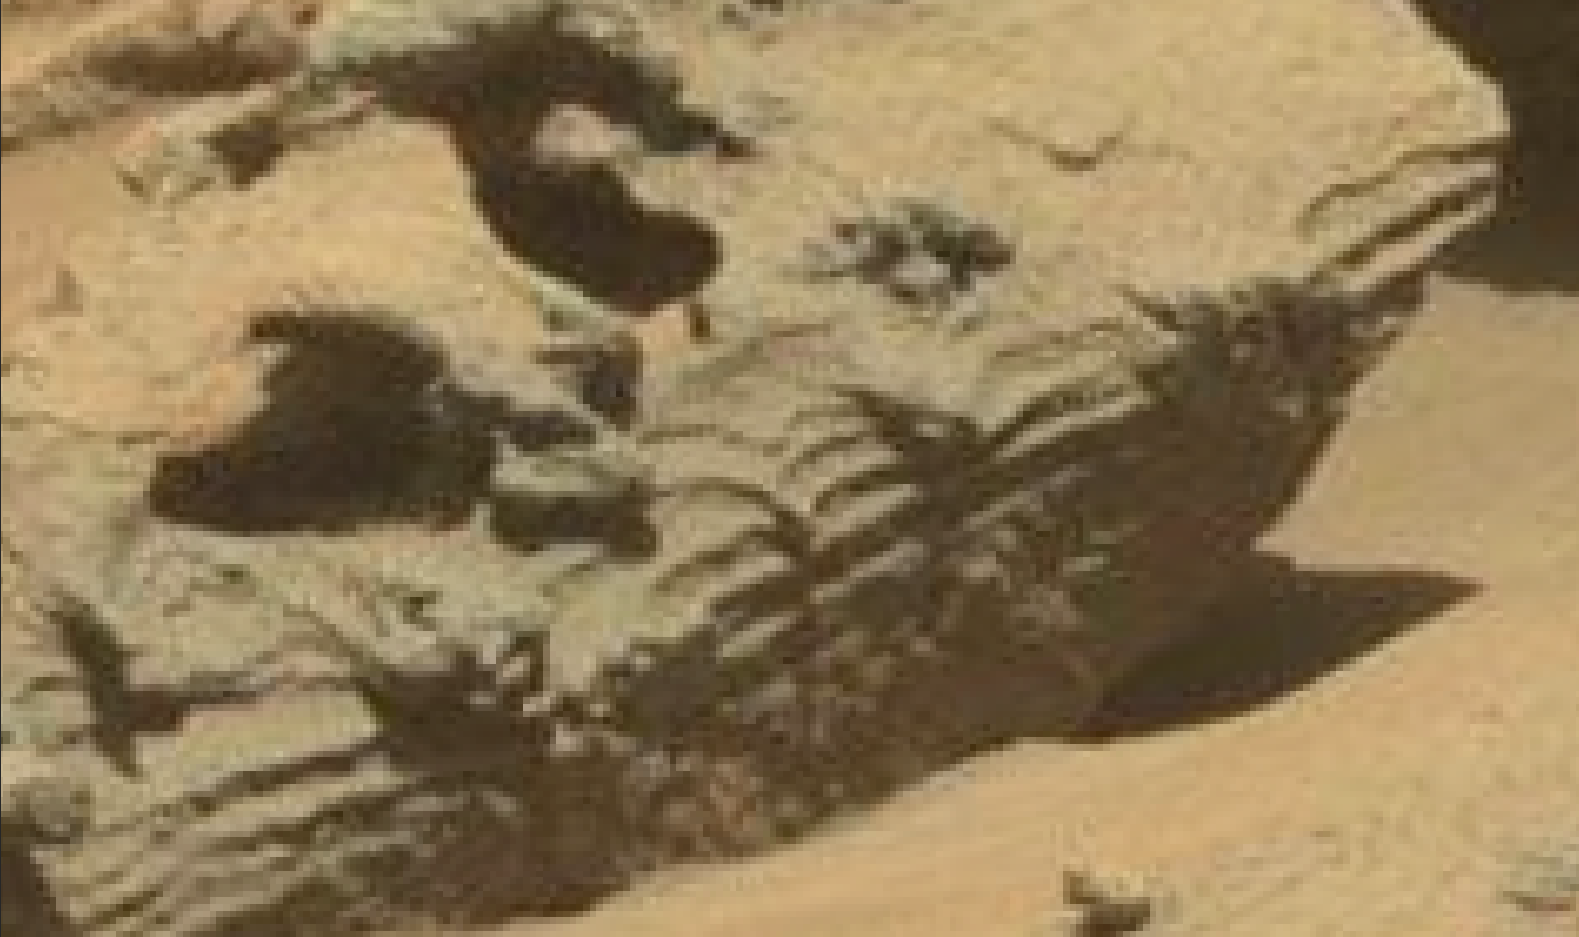 mars sol 1293 anomaly-artifacts 3b was life on mars